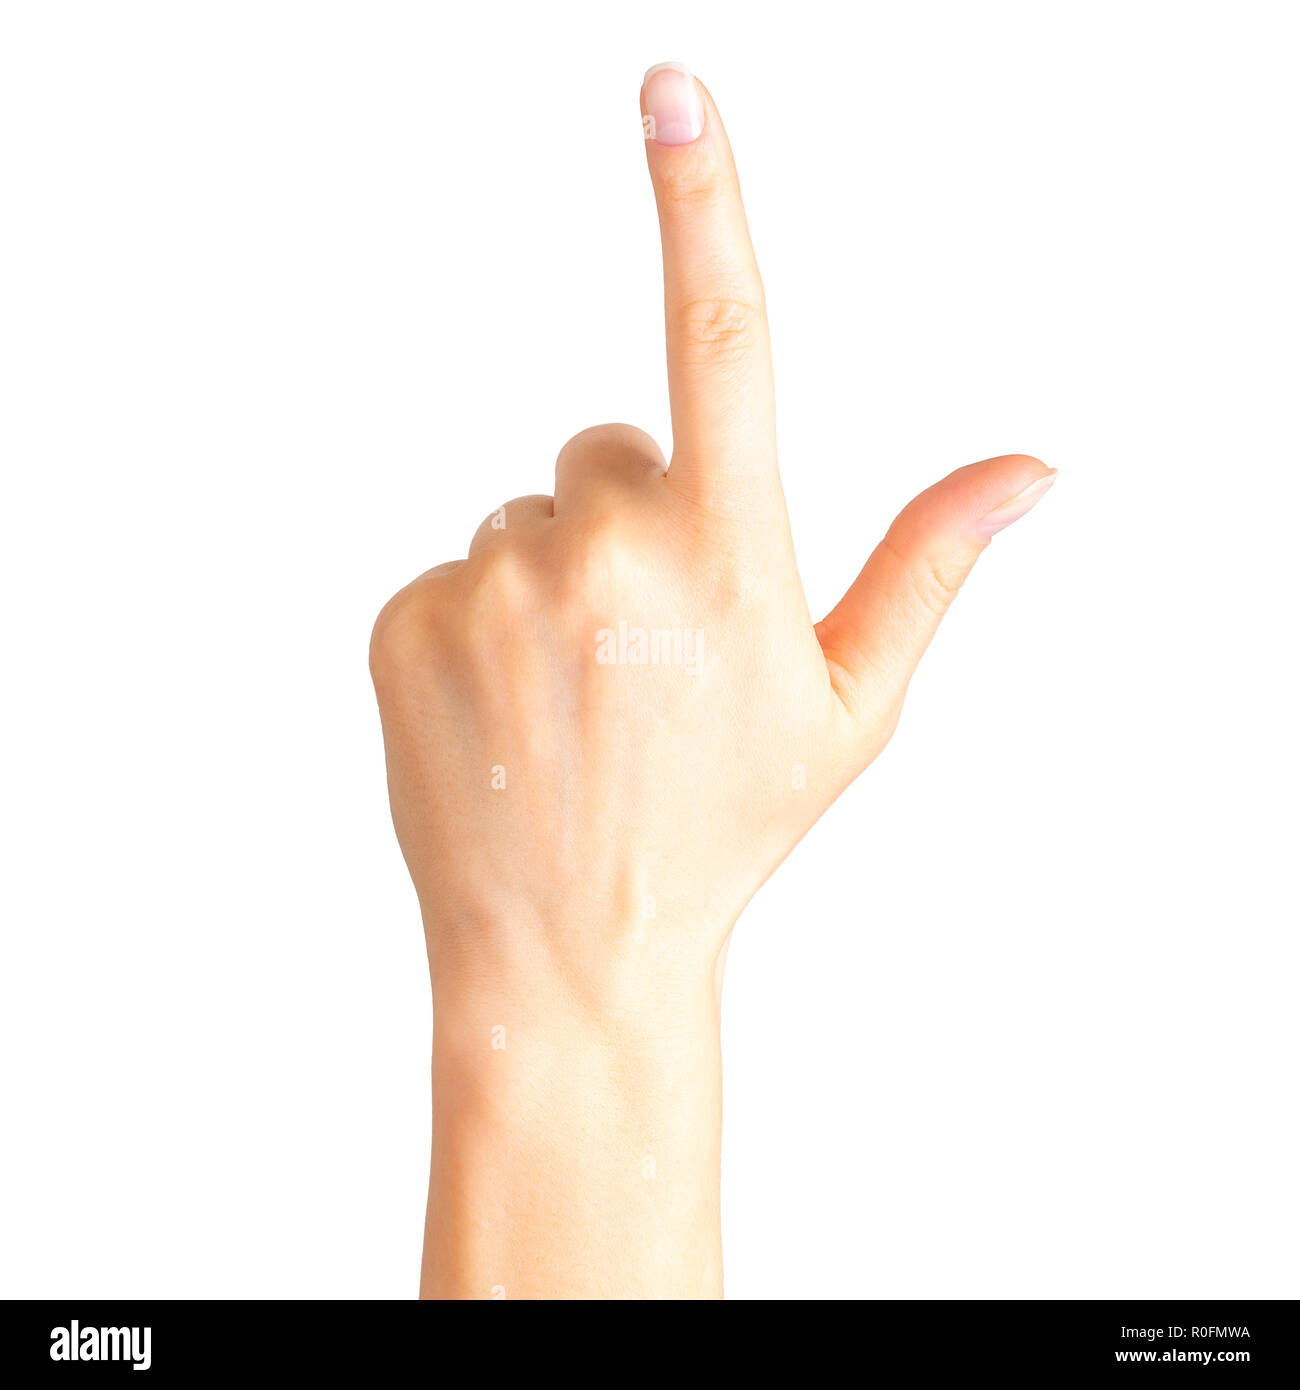 Close-up Of Human Index Finger Stock Photo By 23473286, 40%, 42% OFF